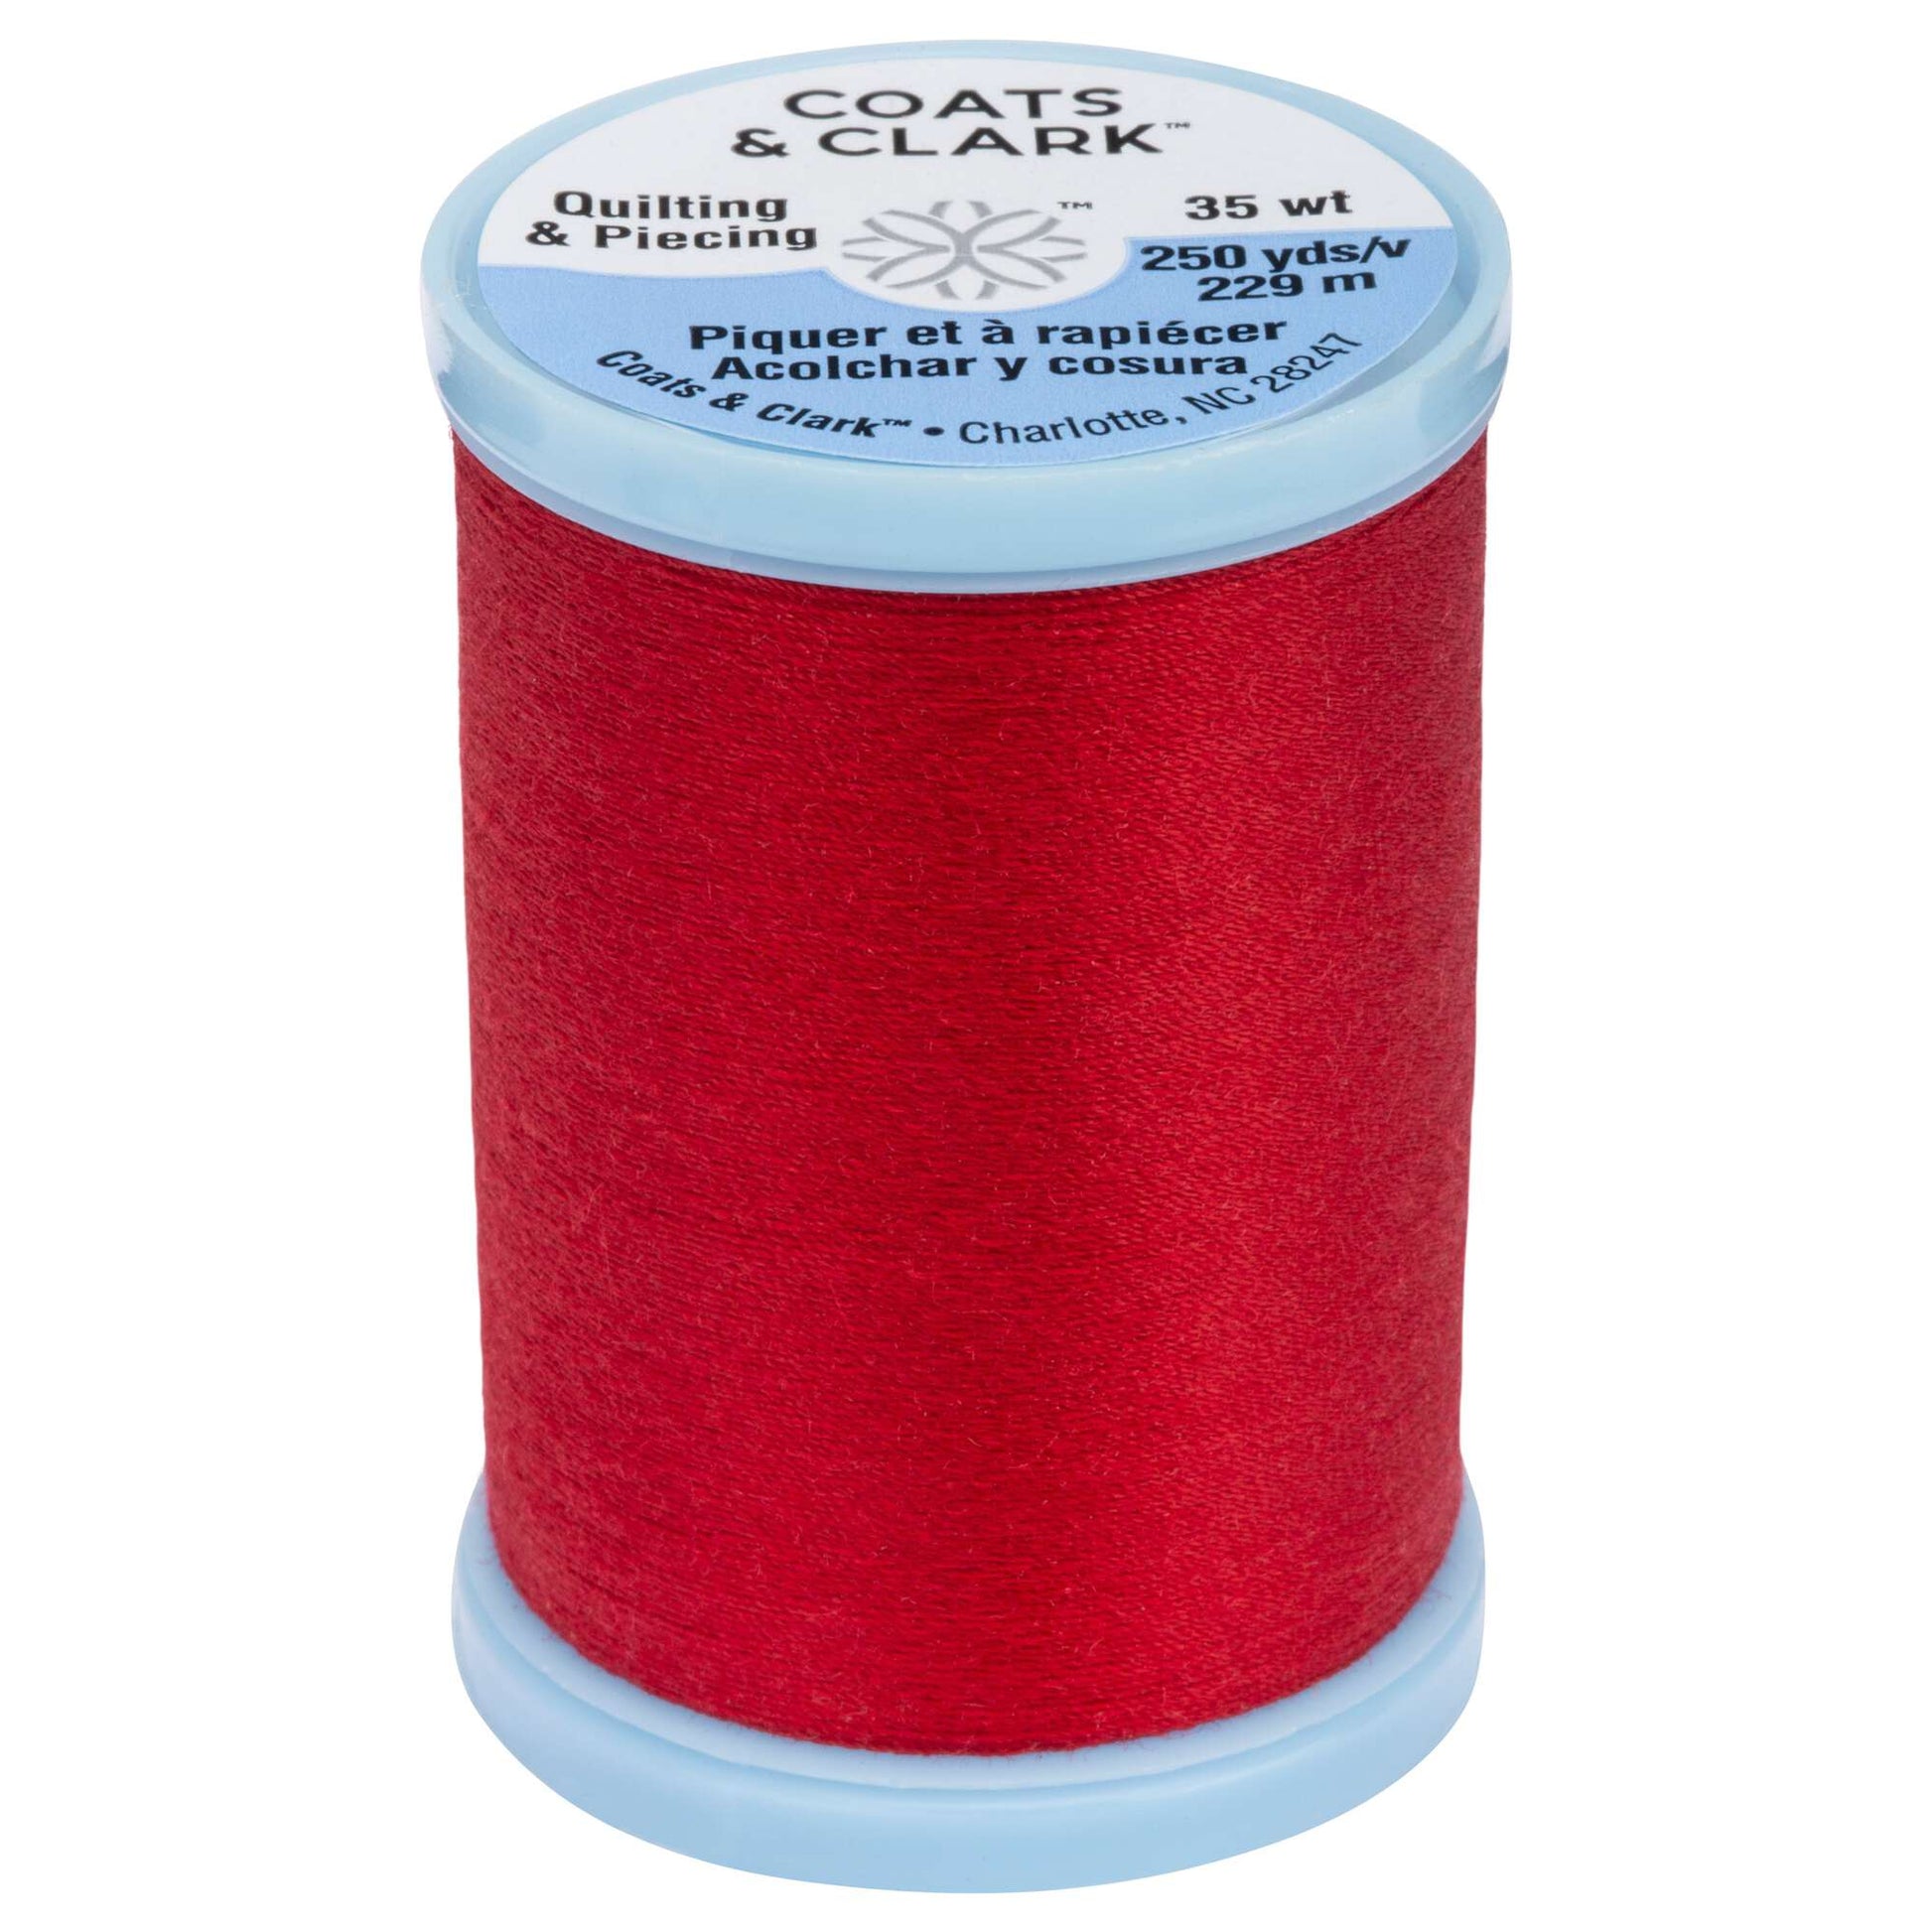 Coats & Clark Cotton Covered Quilting & Piecing Thread (250 Yards) Red